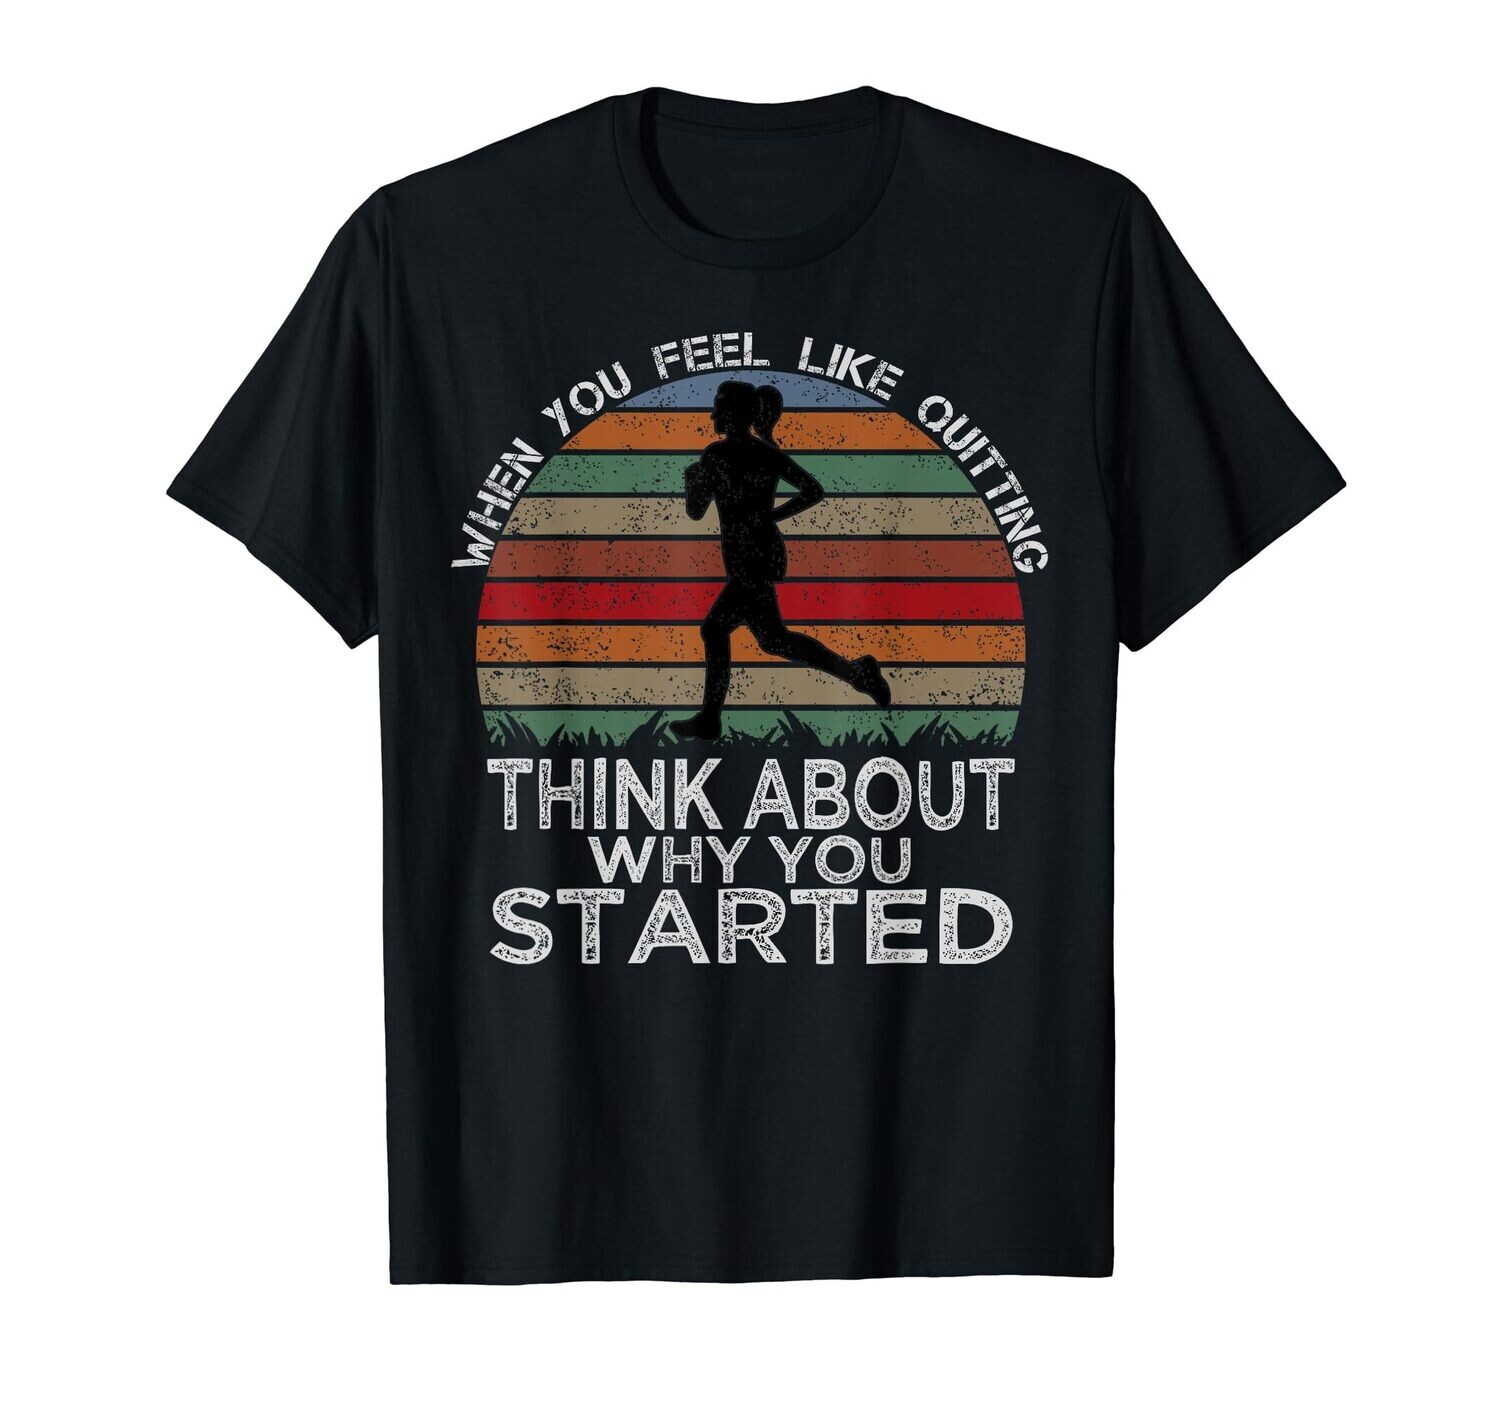 Think about why you started tees